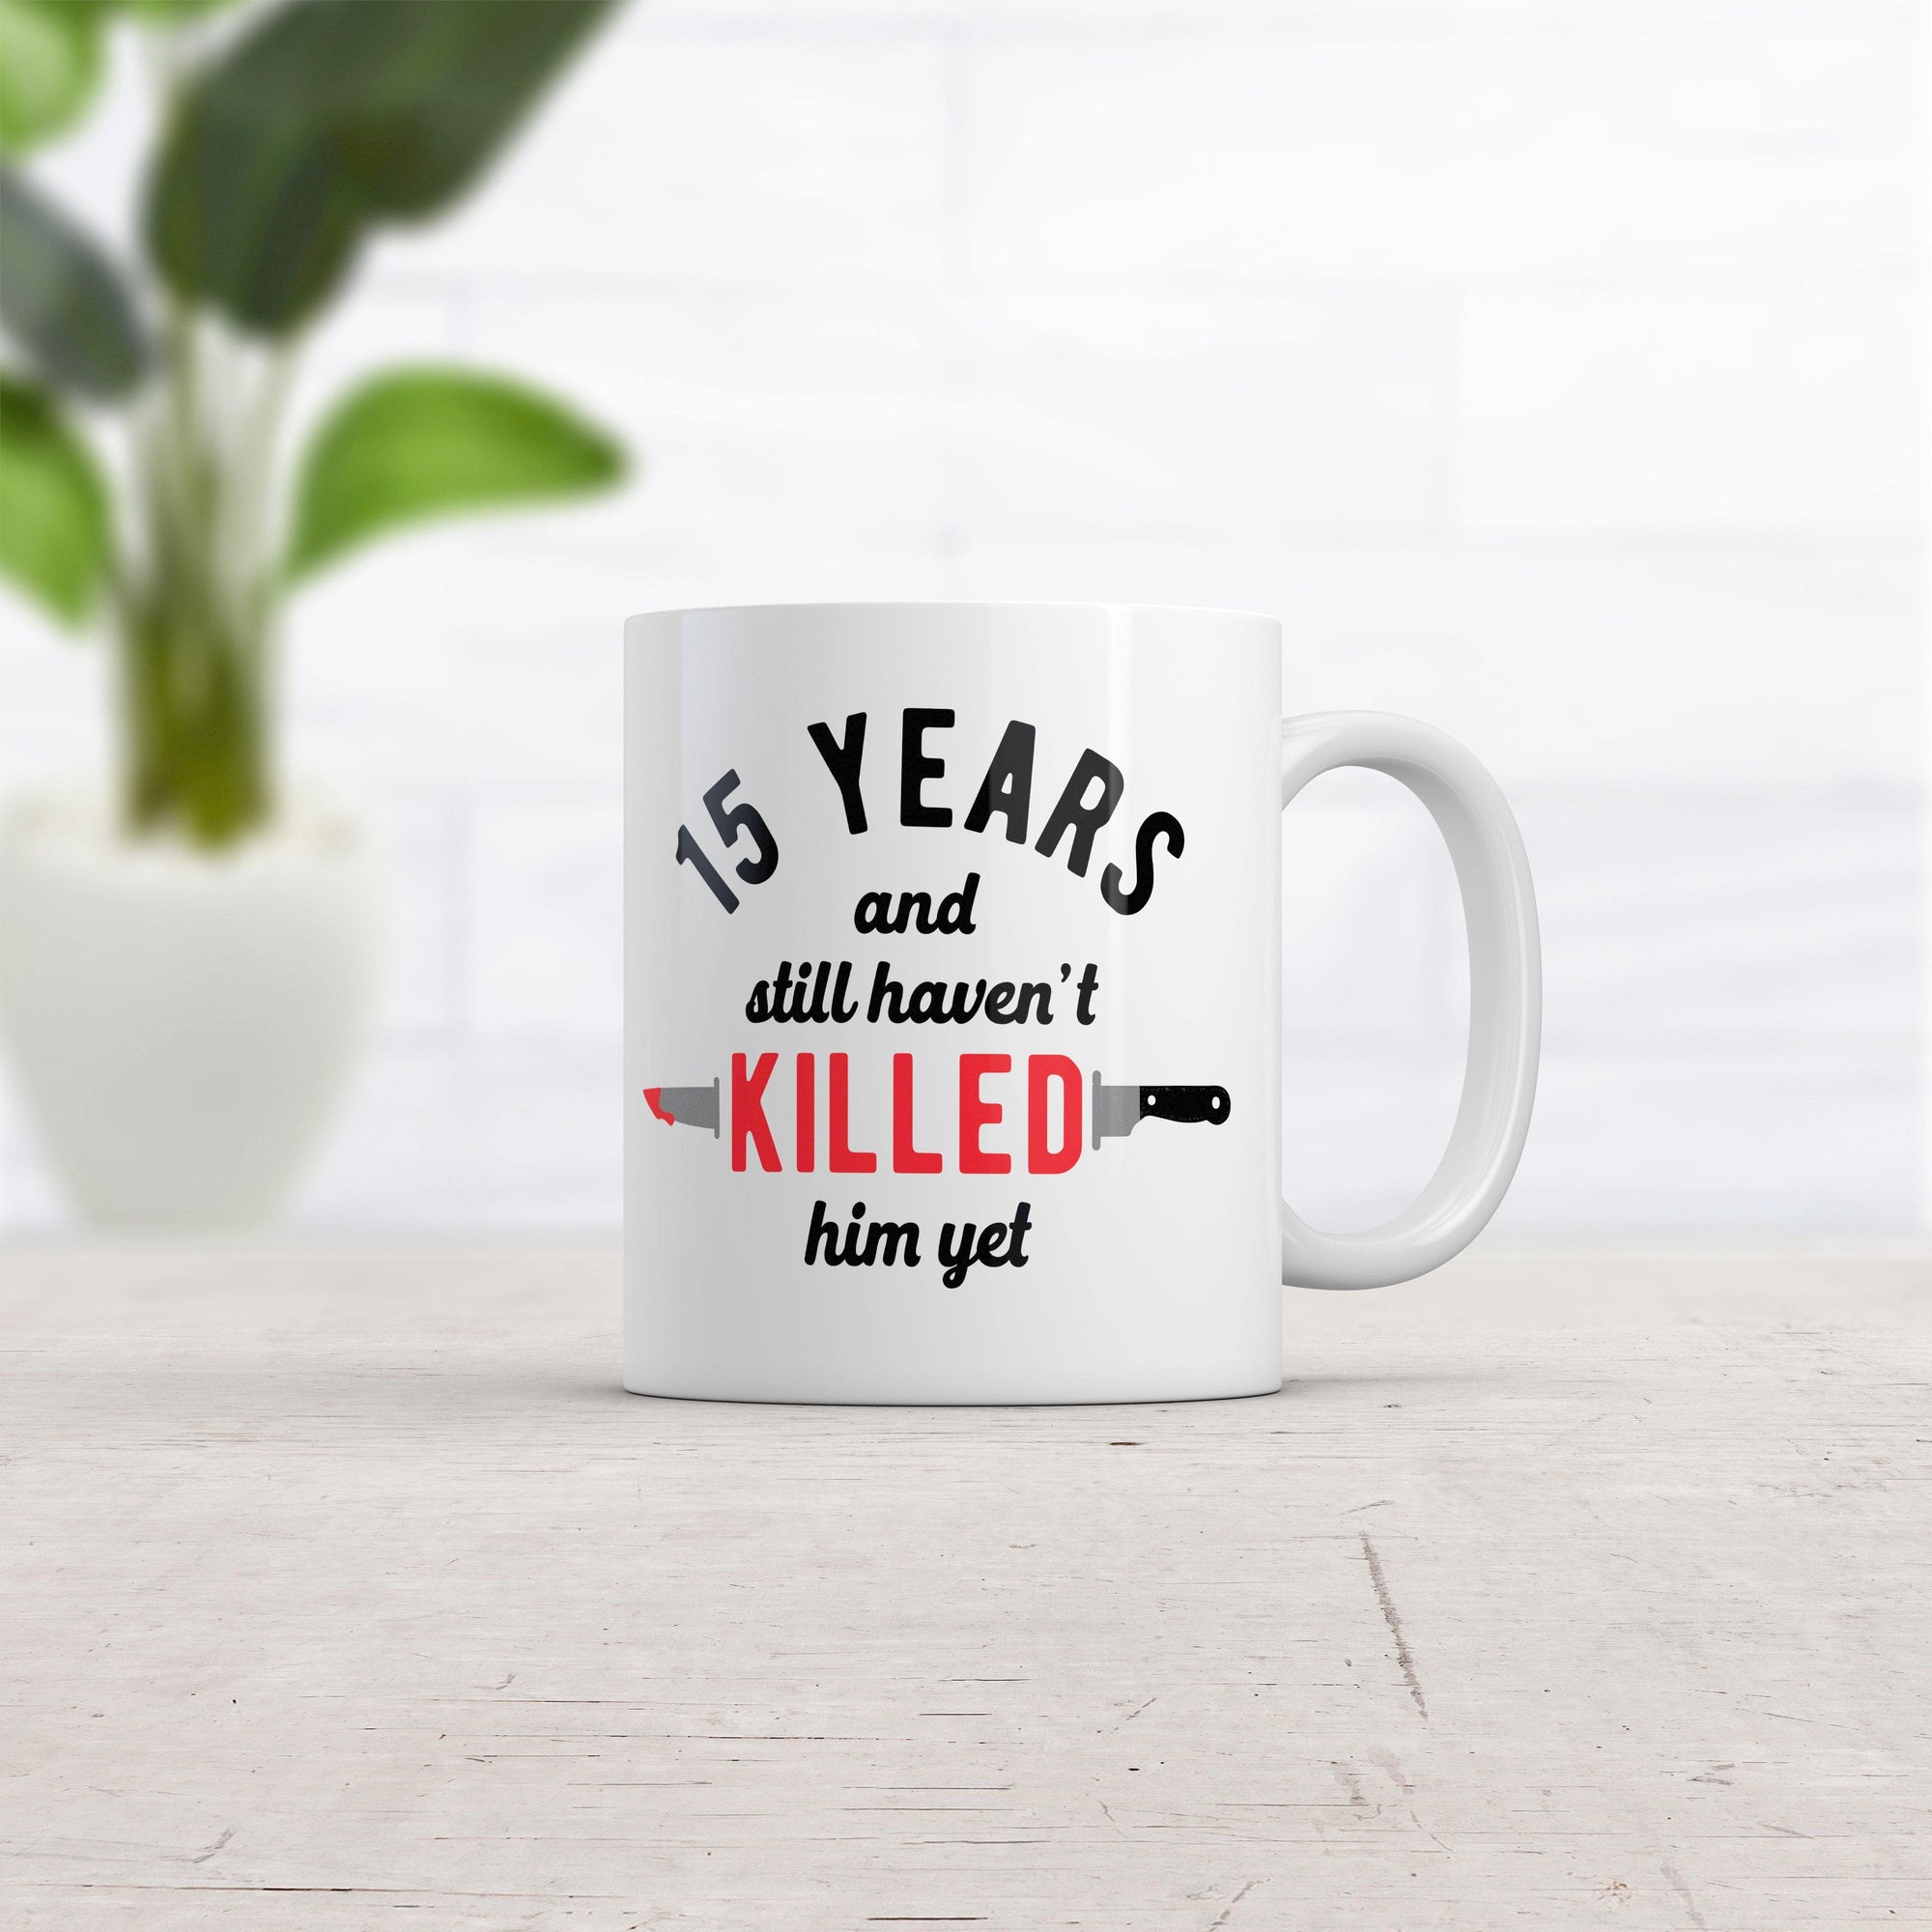 15 Years And I Still Havent Killed Him Yet Mug Funny Sarcastic Married Anniversary Novelty Coffee Cup-11oz  -  Crazy Dog T-Shirts